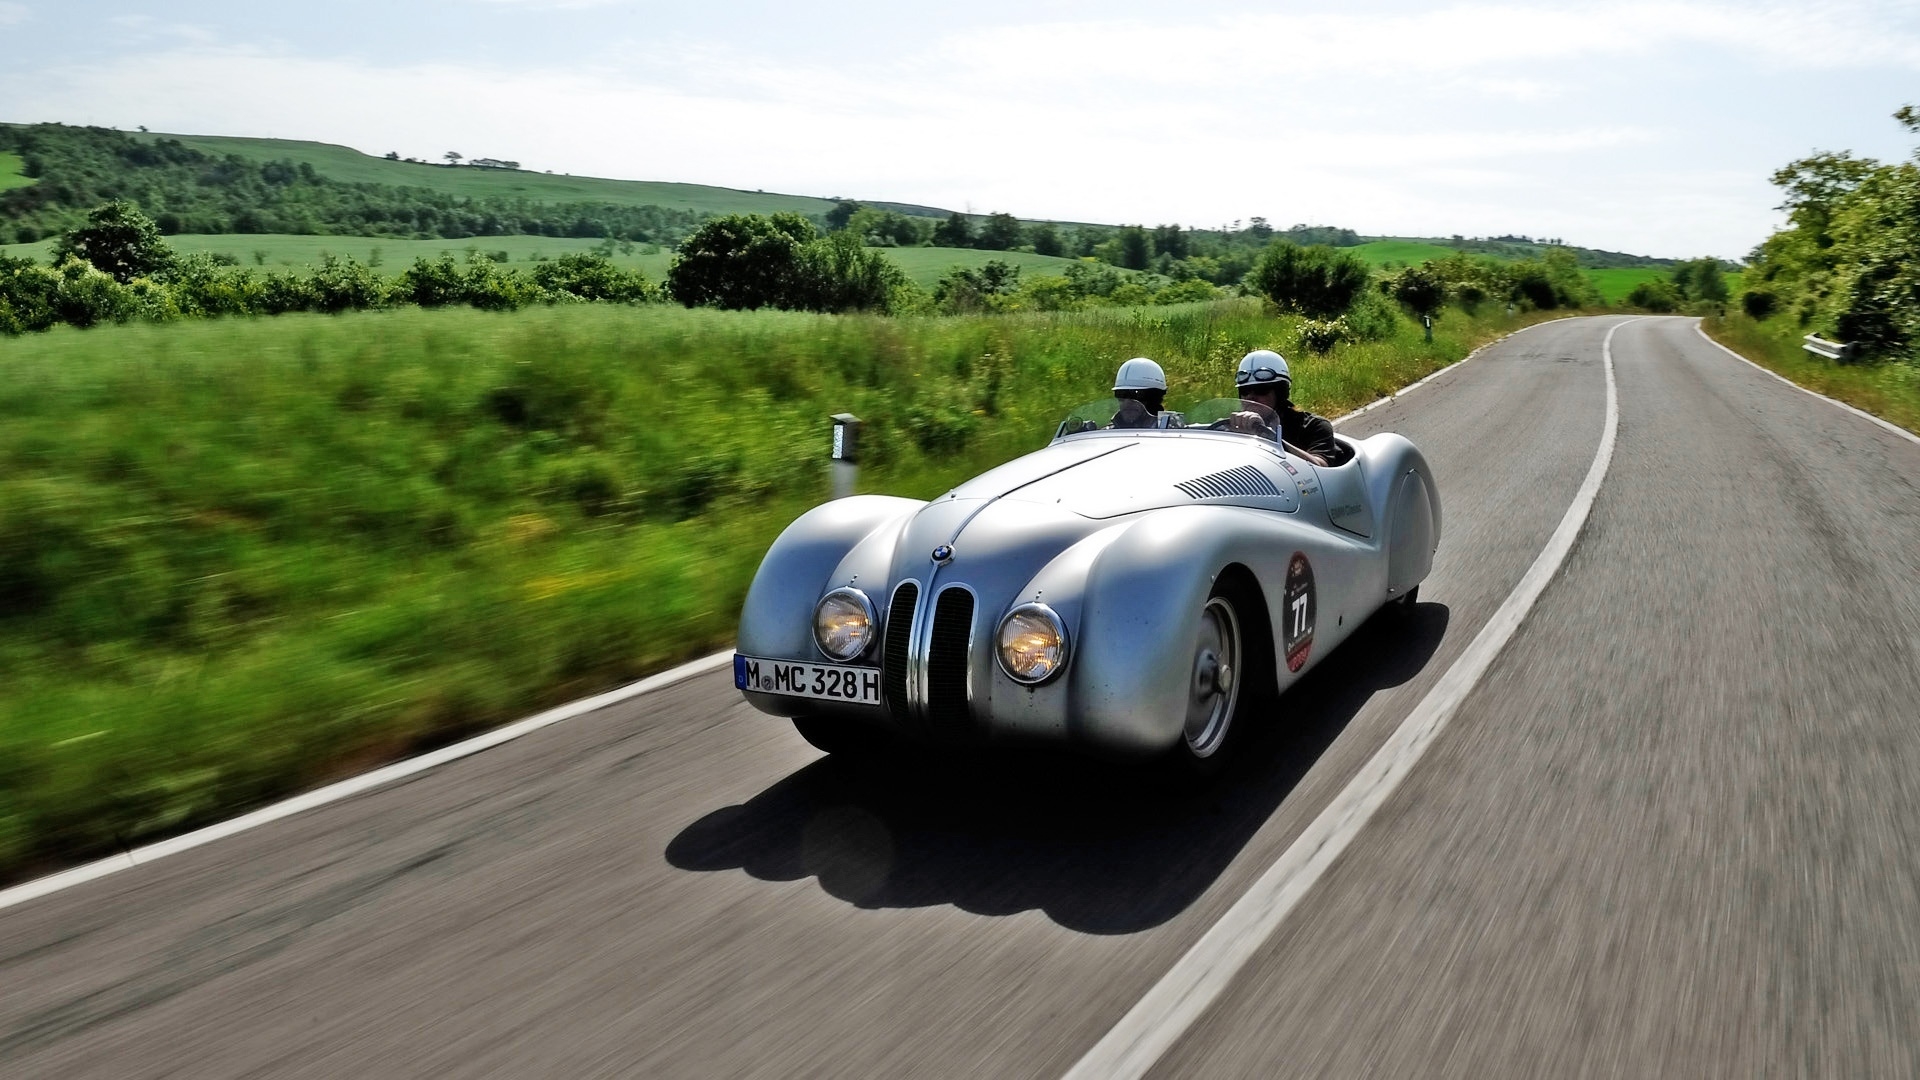 BMW 328 Mille Miglia Silver for 1920 x 1080 HDTV 1080p resolution